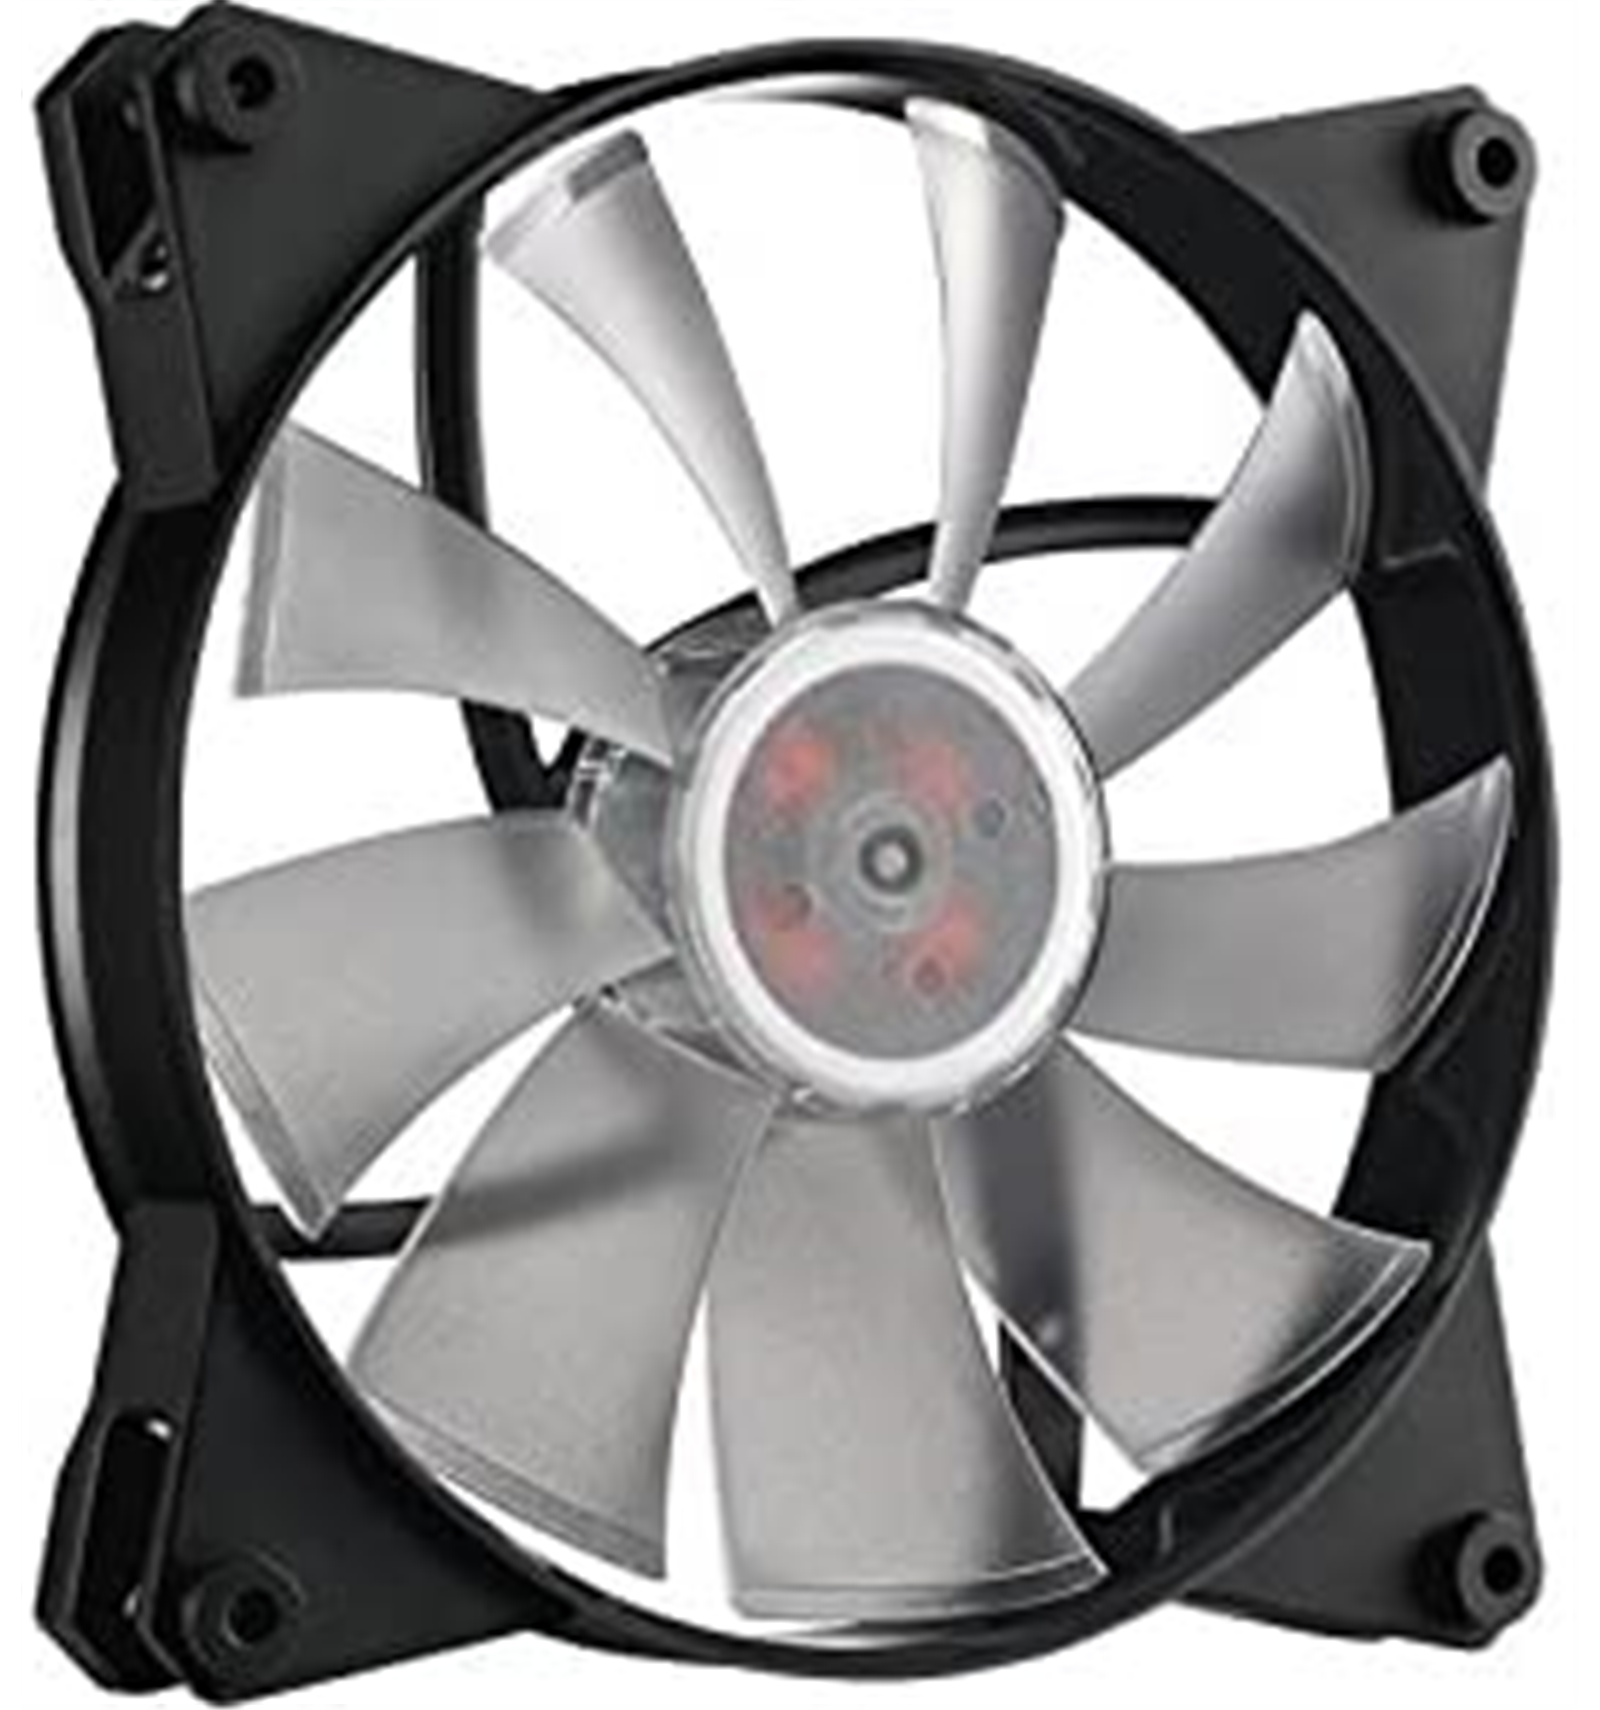 Cooler Master MasterFan Pro 140 Air Pressure RGB PACK, ventola 140mm LED,  500 800 RPM, 3in1 con controller RGB - DaxStore S.R.L.S.